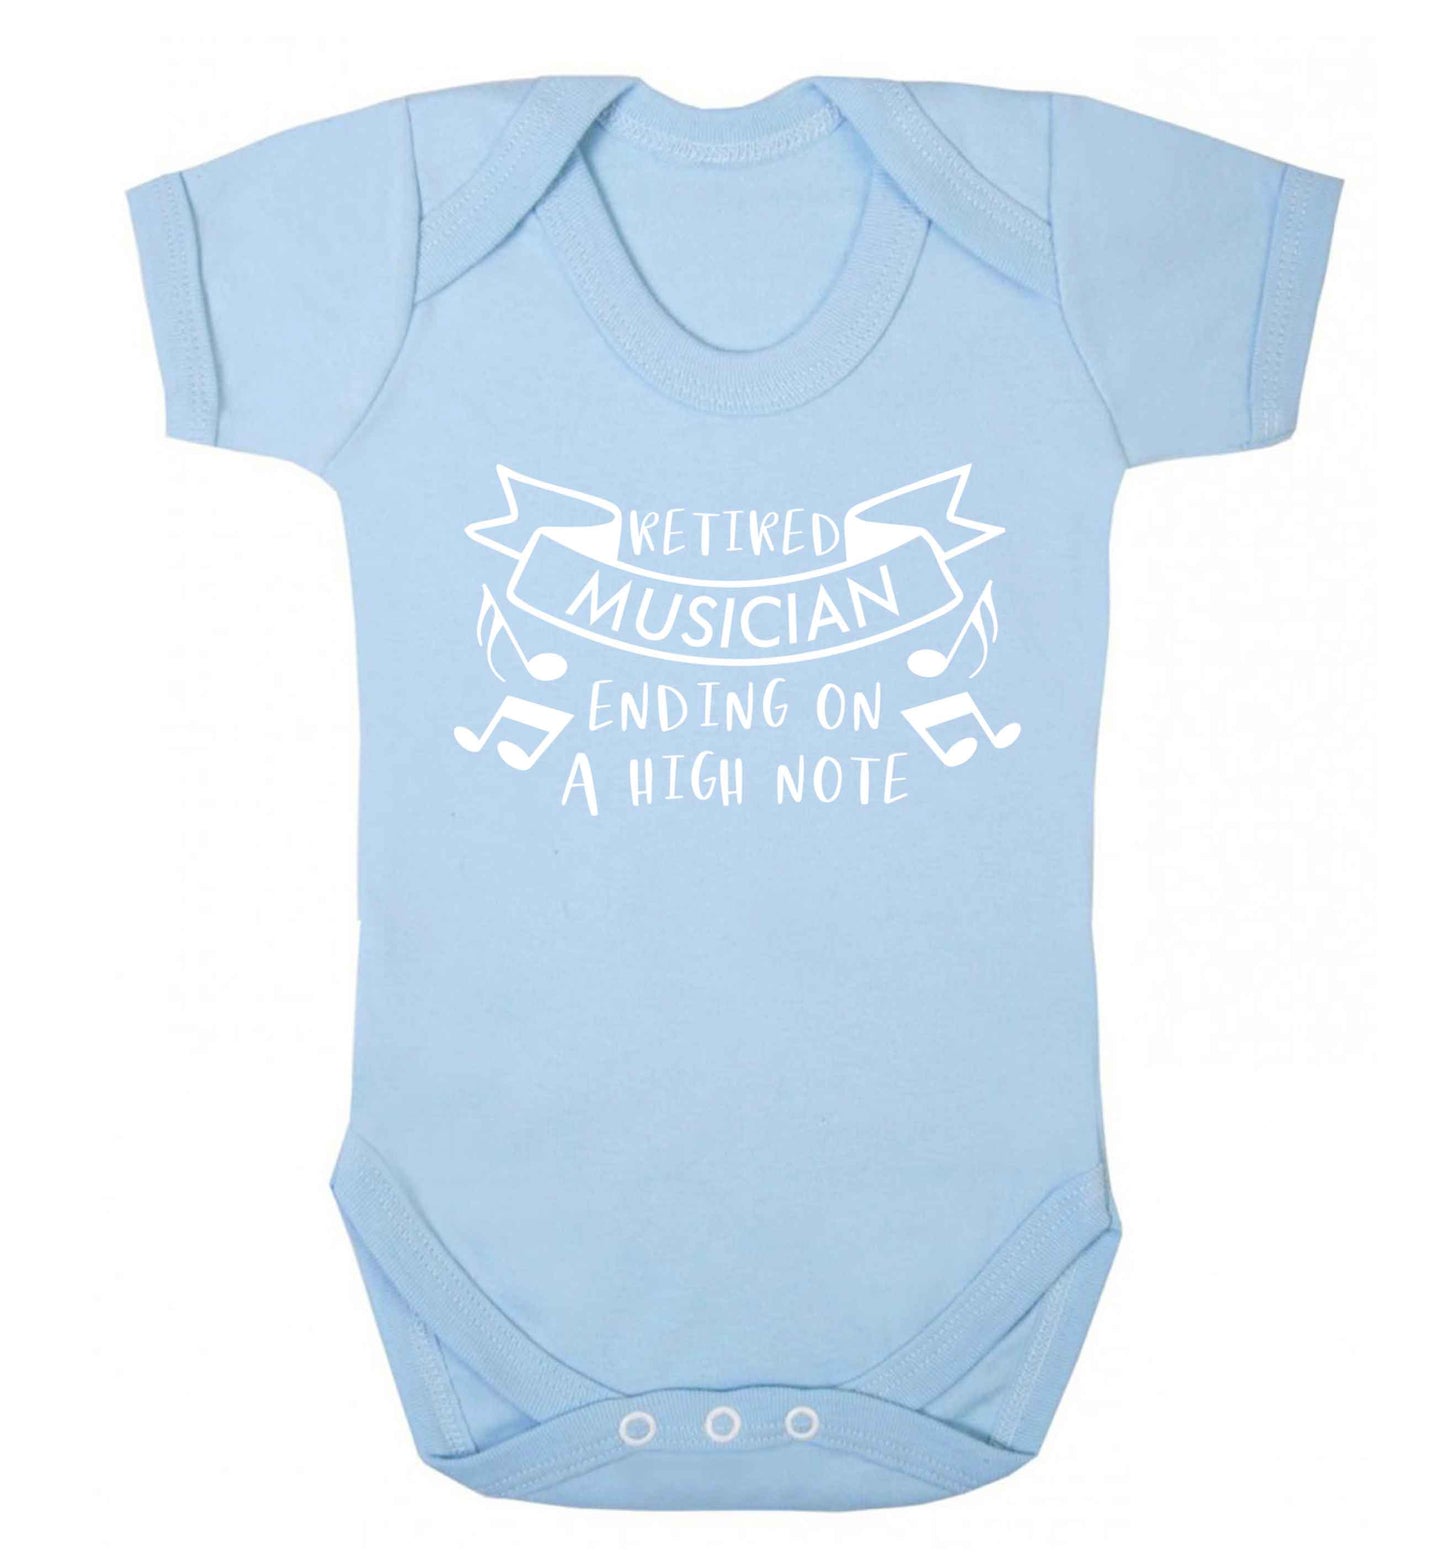 Retired musician ending on a high note Baby Vest pale blue 18-24 months